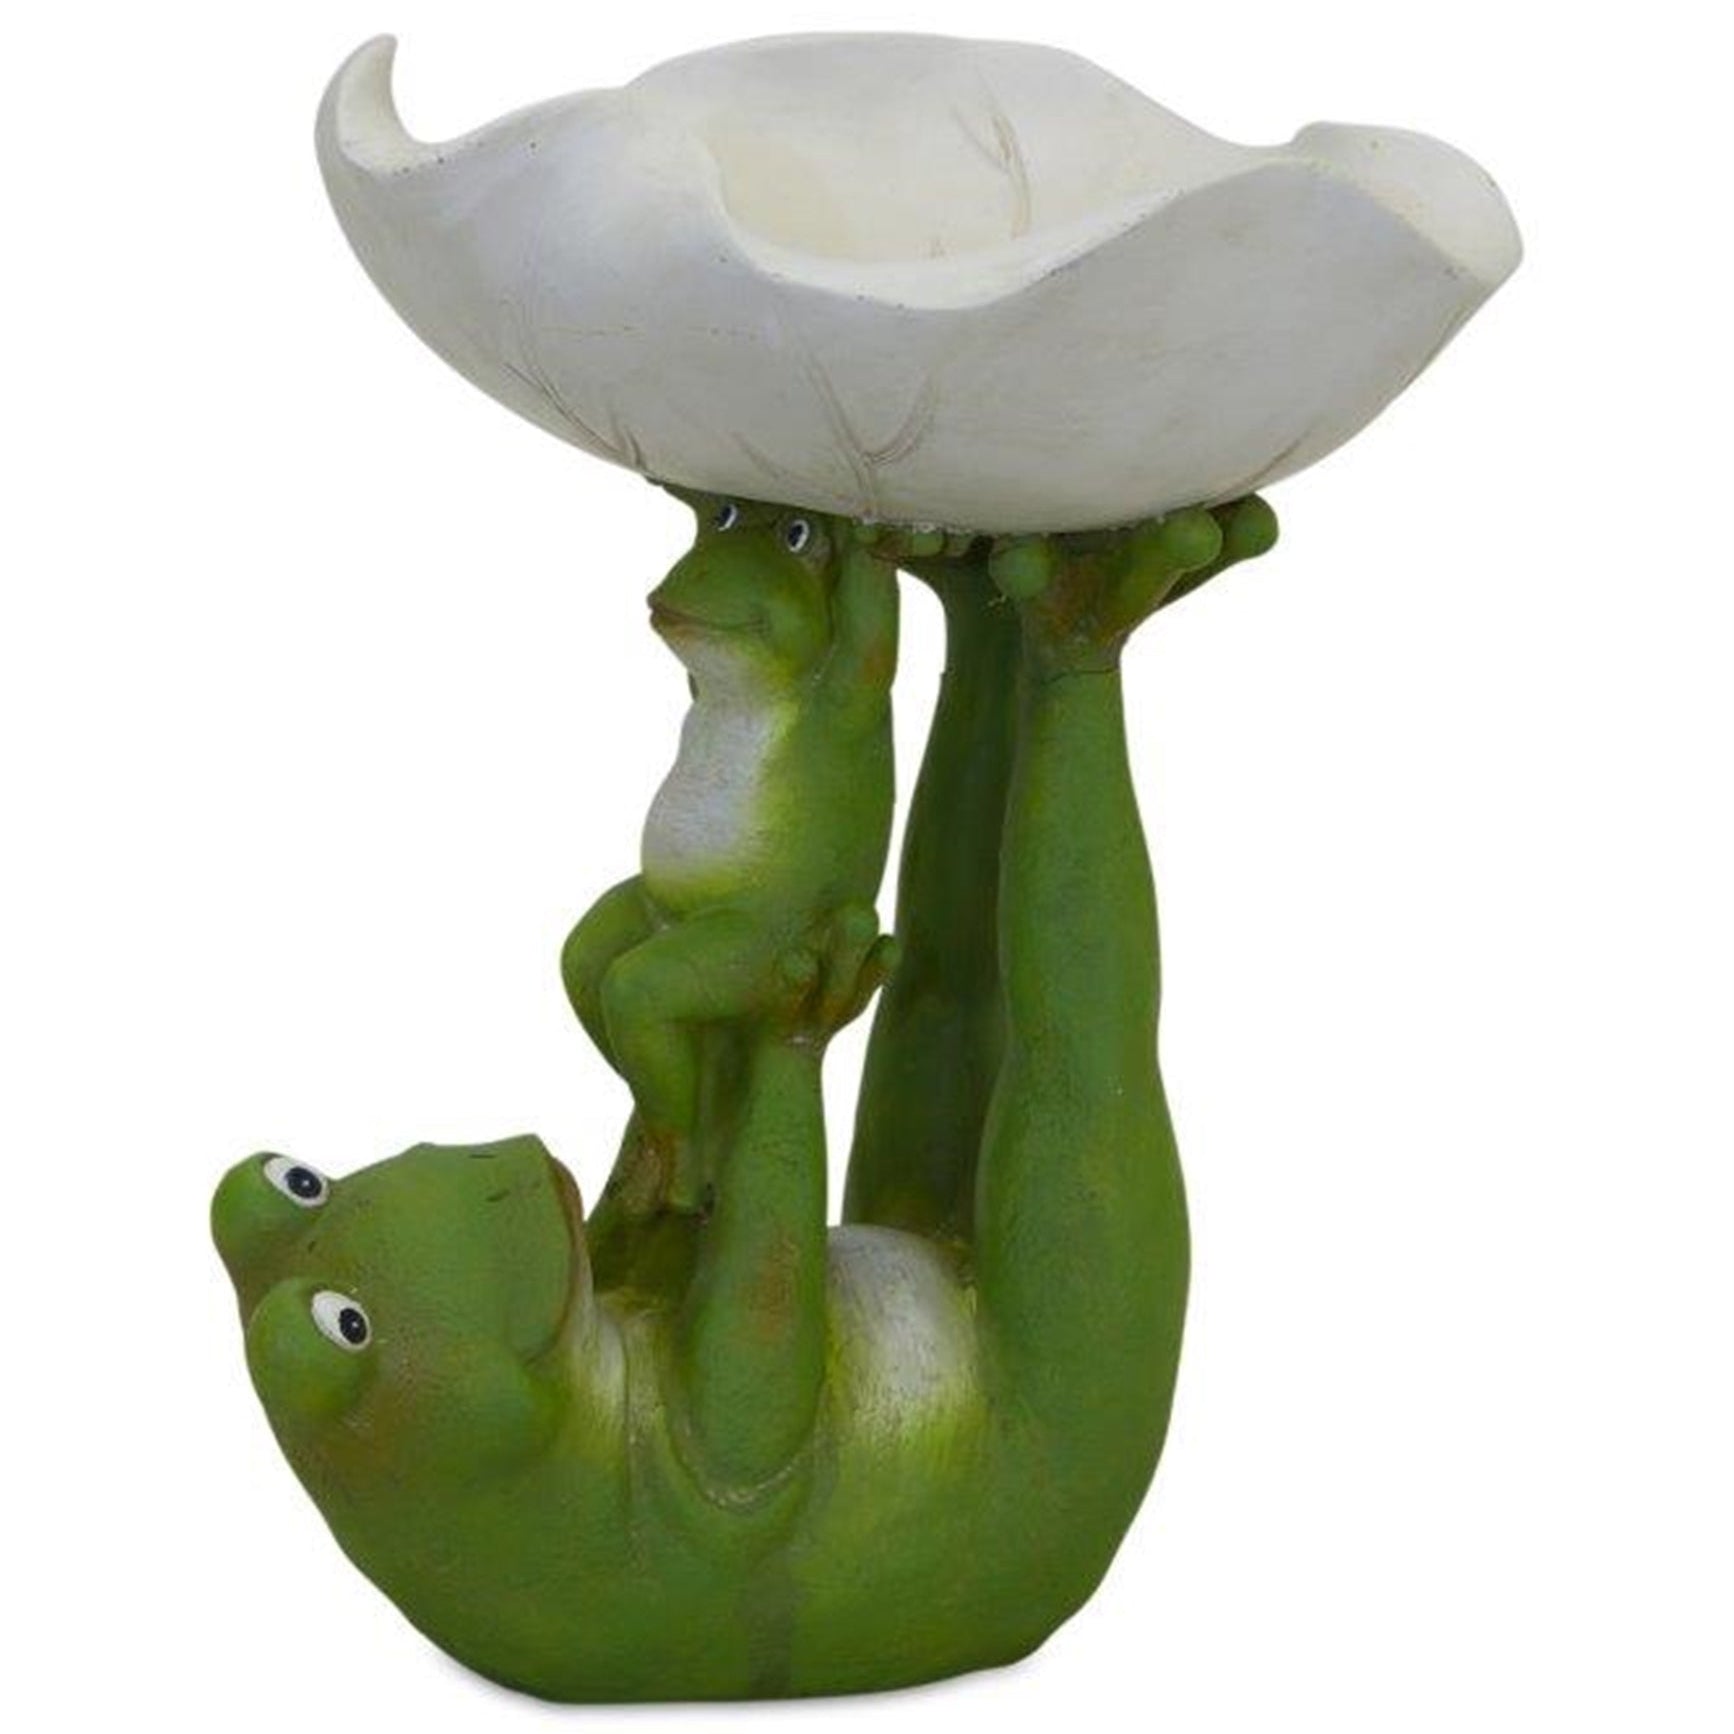 Garden Frogs with Leaf Bowl Statue 8"H - Outdoor Decor